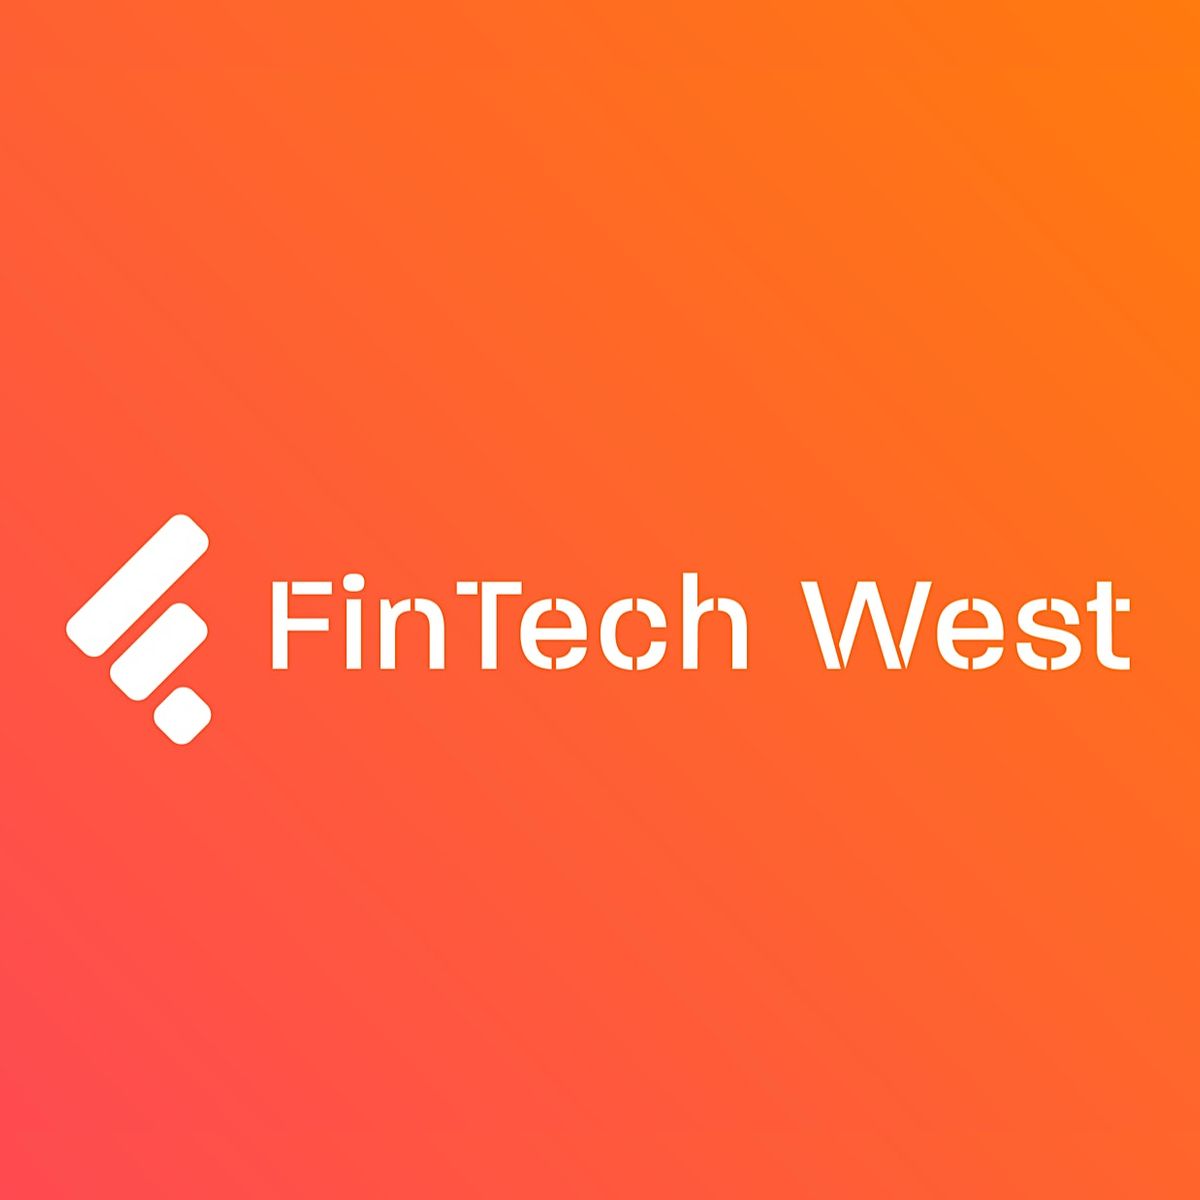 FinTech West and PwC present a Forum on Cyber Security